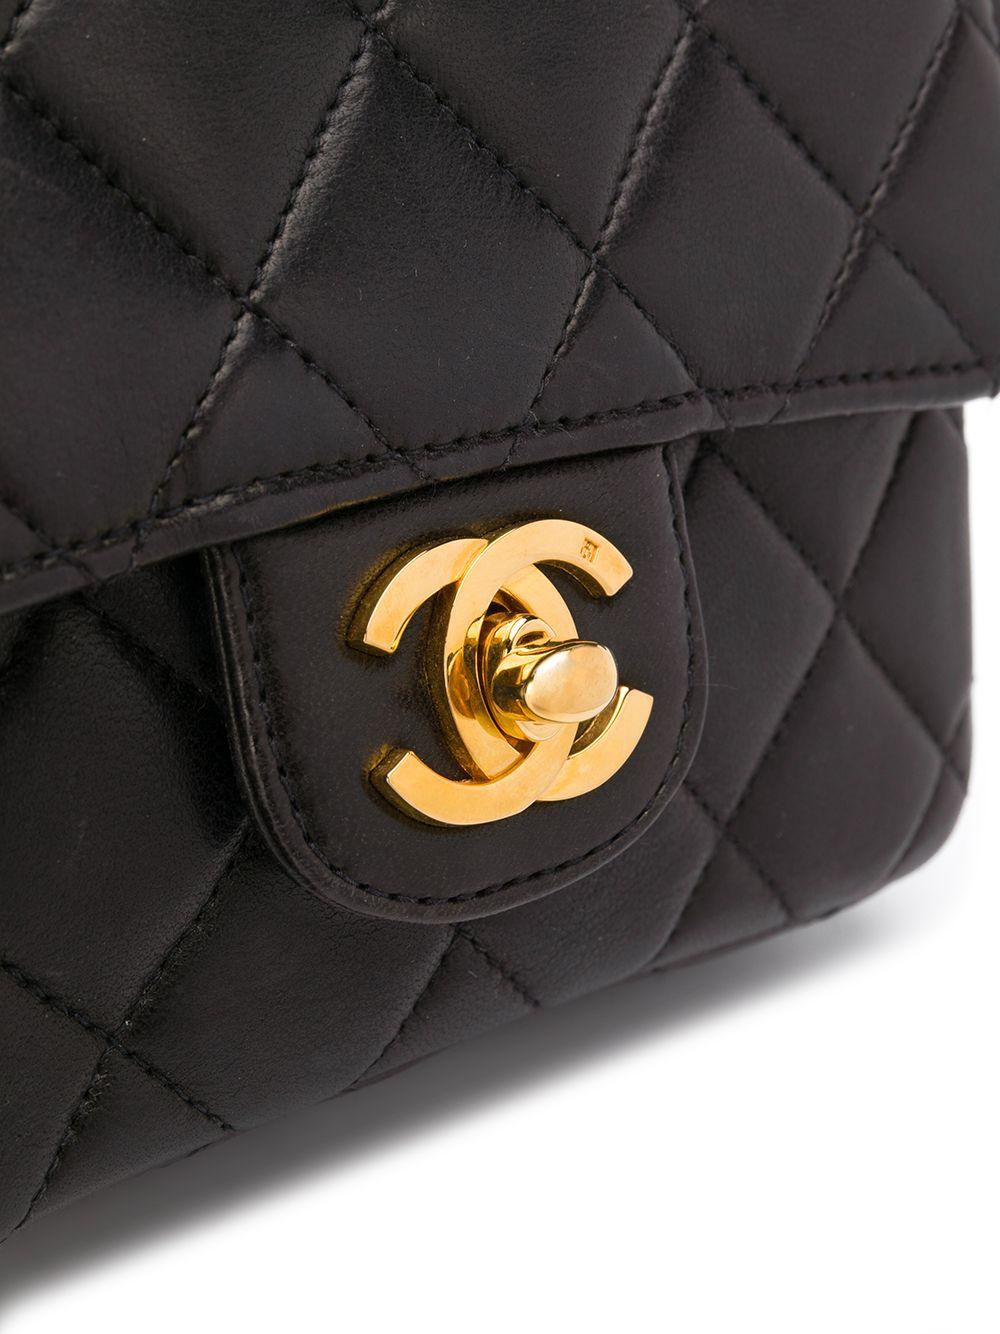 Crafted in France from pure black lambskin leather, this pre-loved Chanel mini kelly bag features a soft quilted exterior, a rear patch pocket and a single rolled top handle for an added touch of sophistication. The foldover top of the bag opens